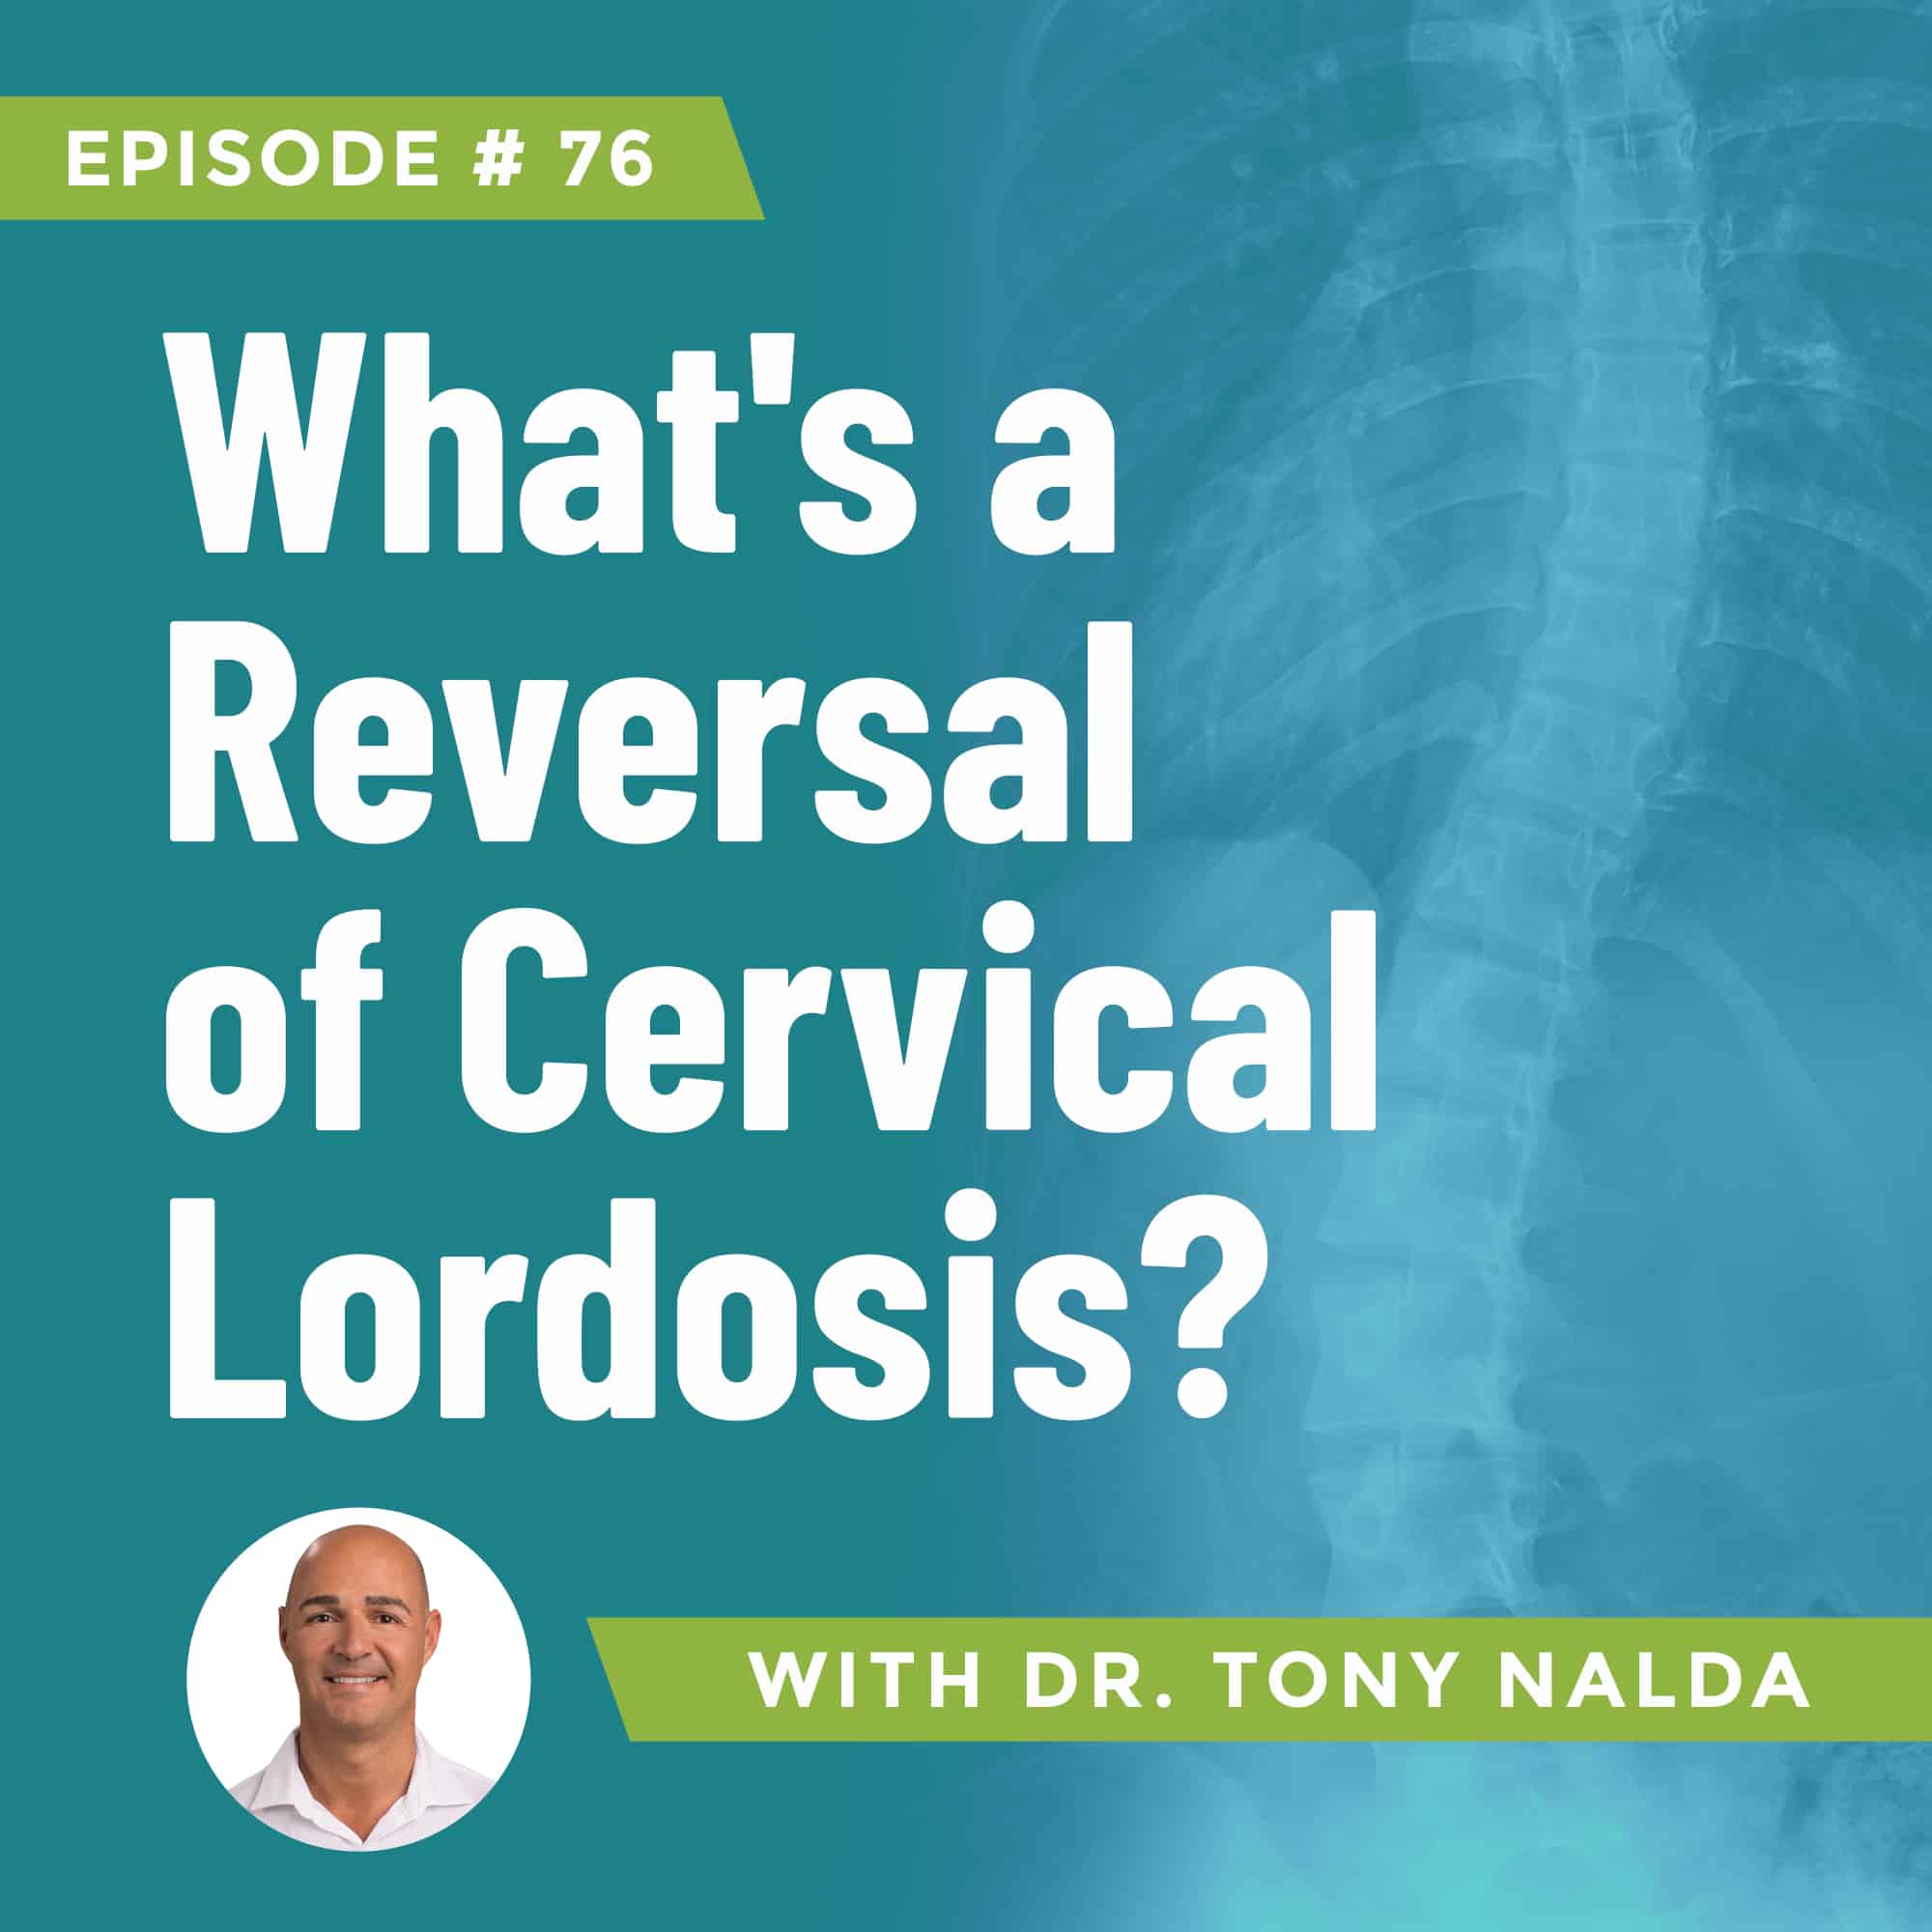 What's a Reversal of Cervical Lordosis